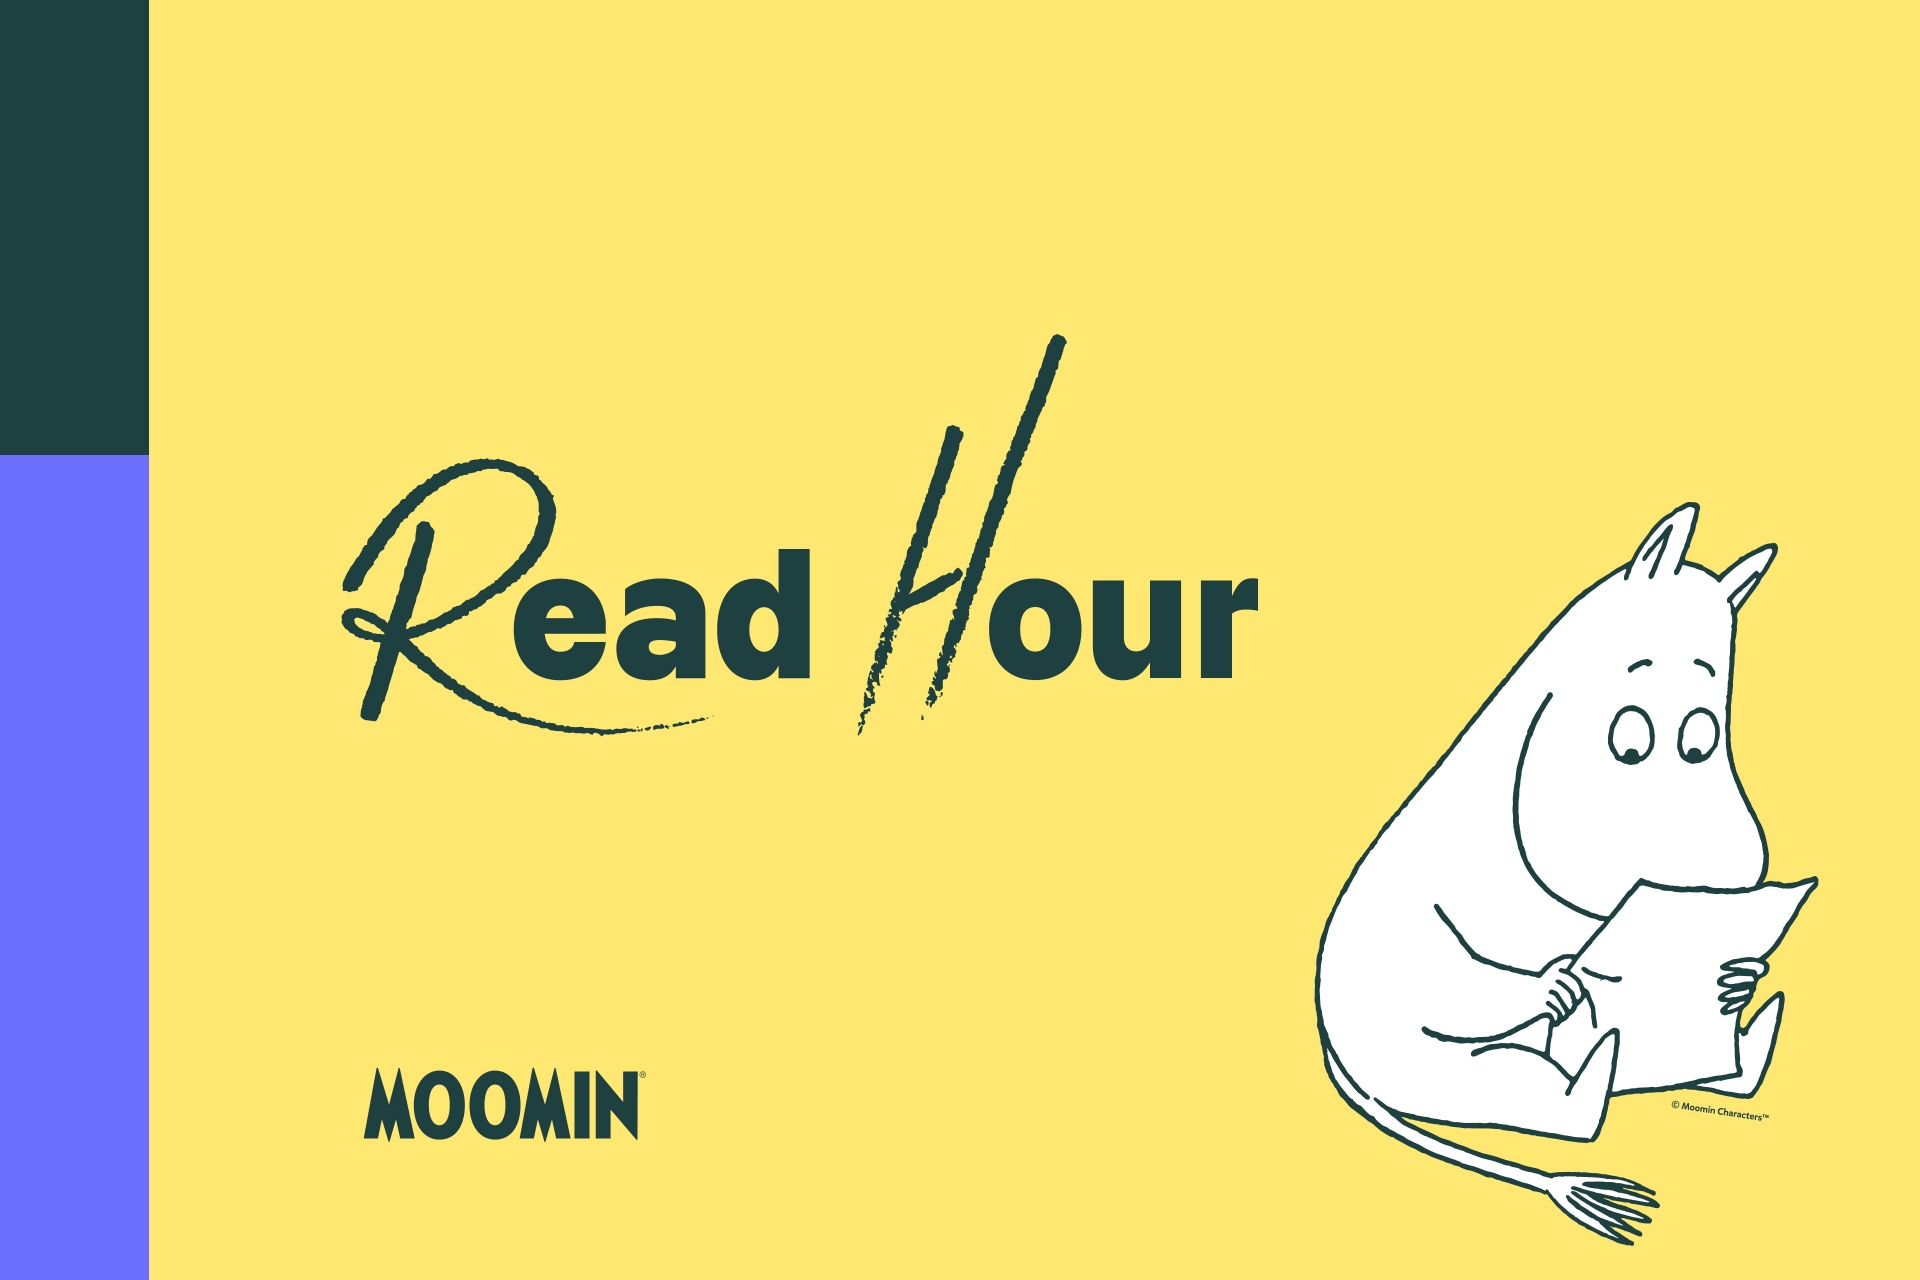 Read Hour returns for its third year in the UK with Moomin Characters